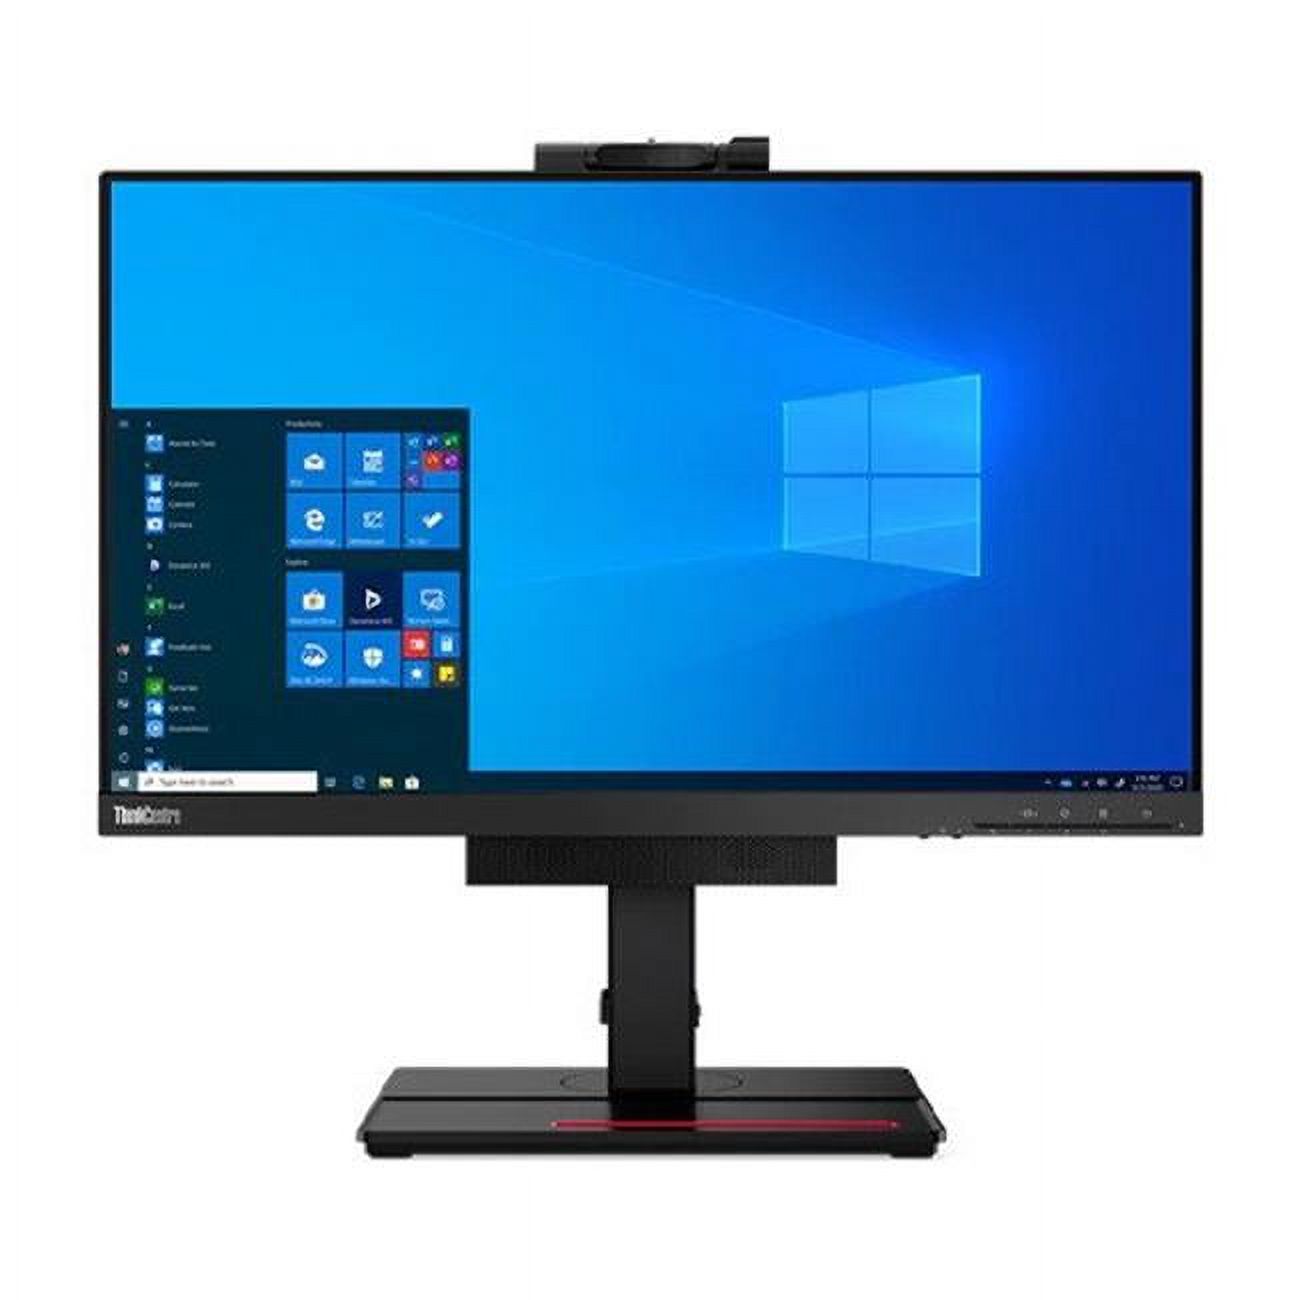 Lenovo ThinkCentre Tiny-in-One 24 Gen 4 23.8" Full HD 60Hz WLED LCD Monitor - 16:9 - Black - 24" Class - In-Plane Switching (IPS) Technology - 1920 x 1080-16.7 Million Colors - 250 Nit - 4 ms - image 1 of 10